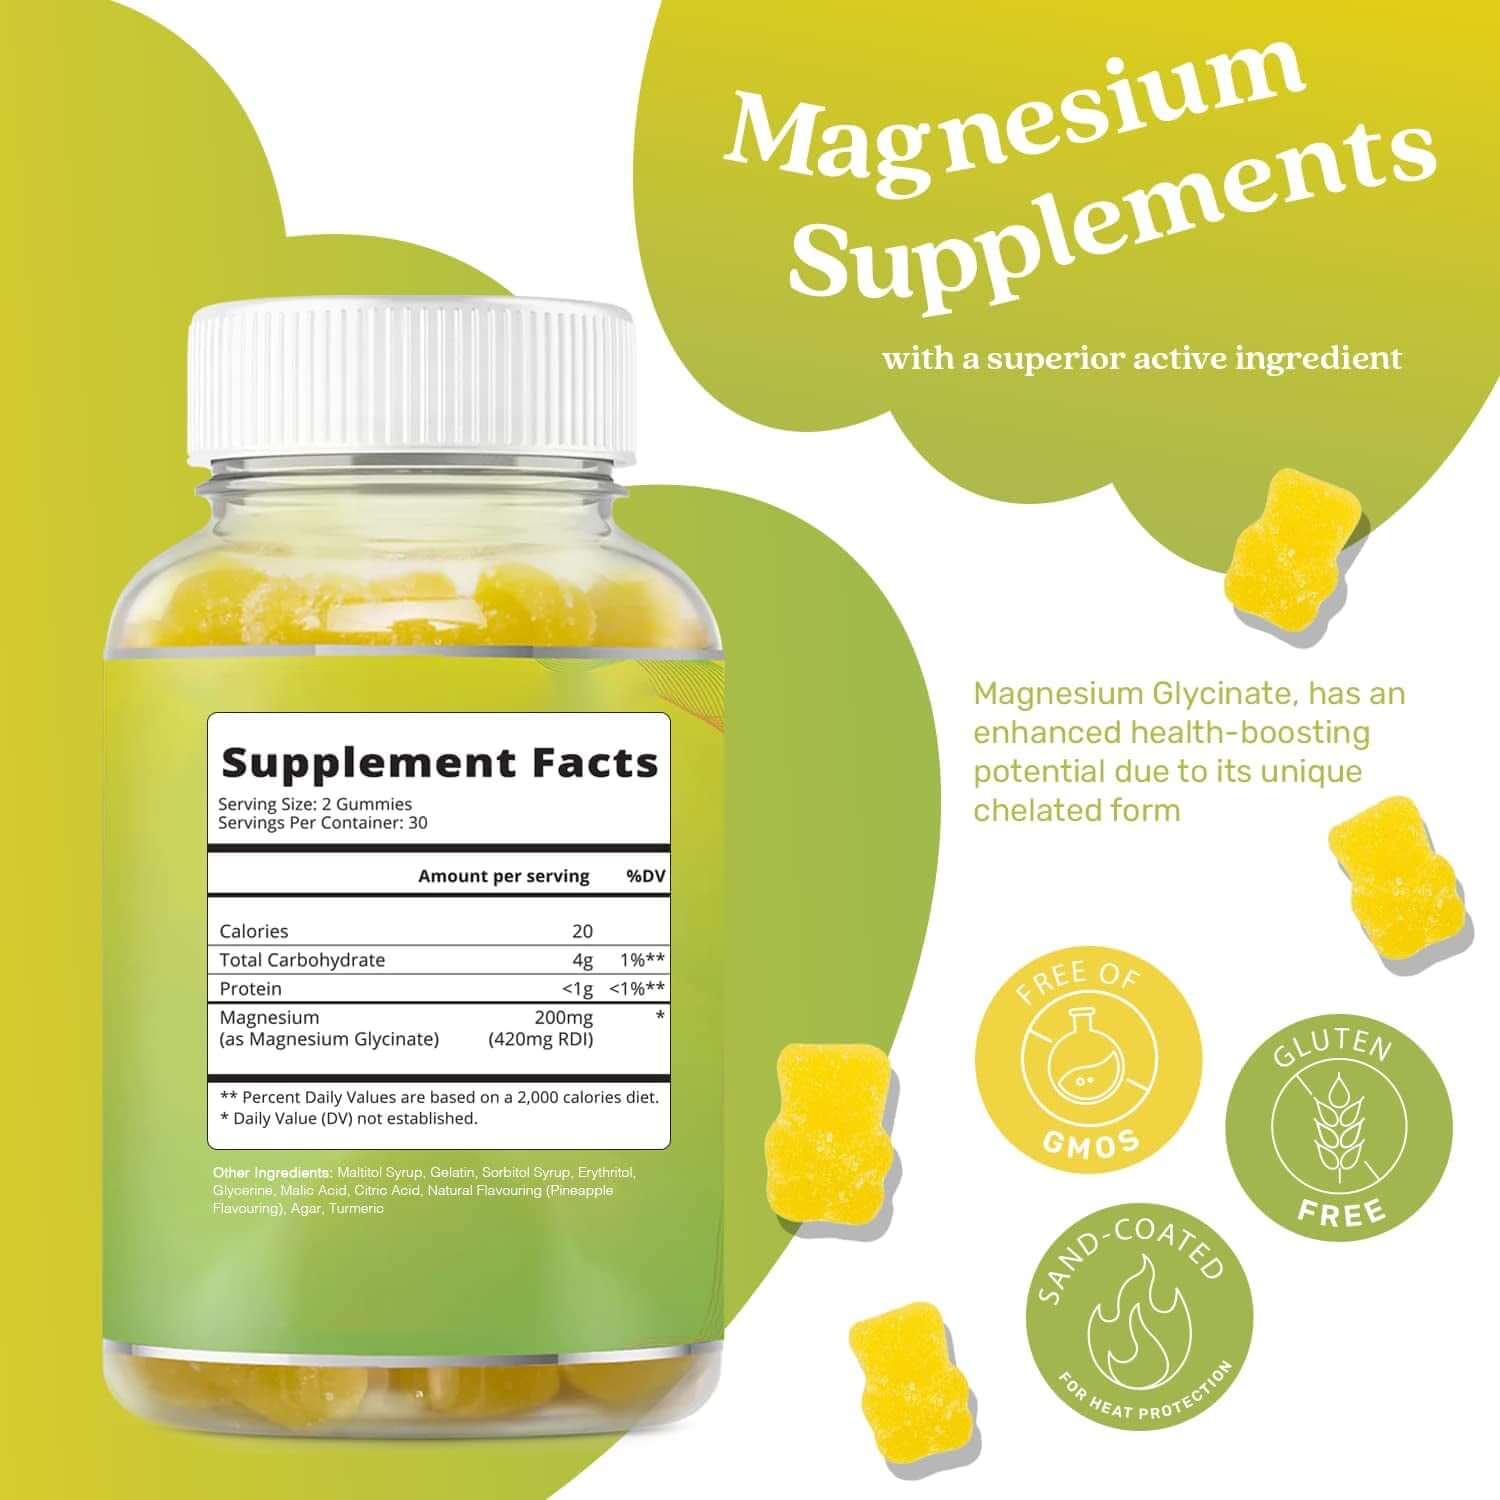 Belive Magnesium Gummies 200Mg - 60 Ct | Magnesium Glycinate Supplements for Relaxation, Stress Relief, and Sleep for Adults & Kids - Tasty and Tangy Pineapple Flavor - vitamenstore.com